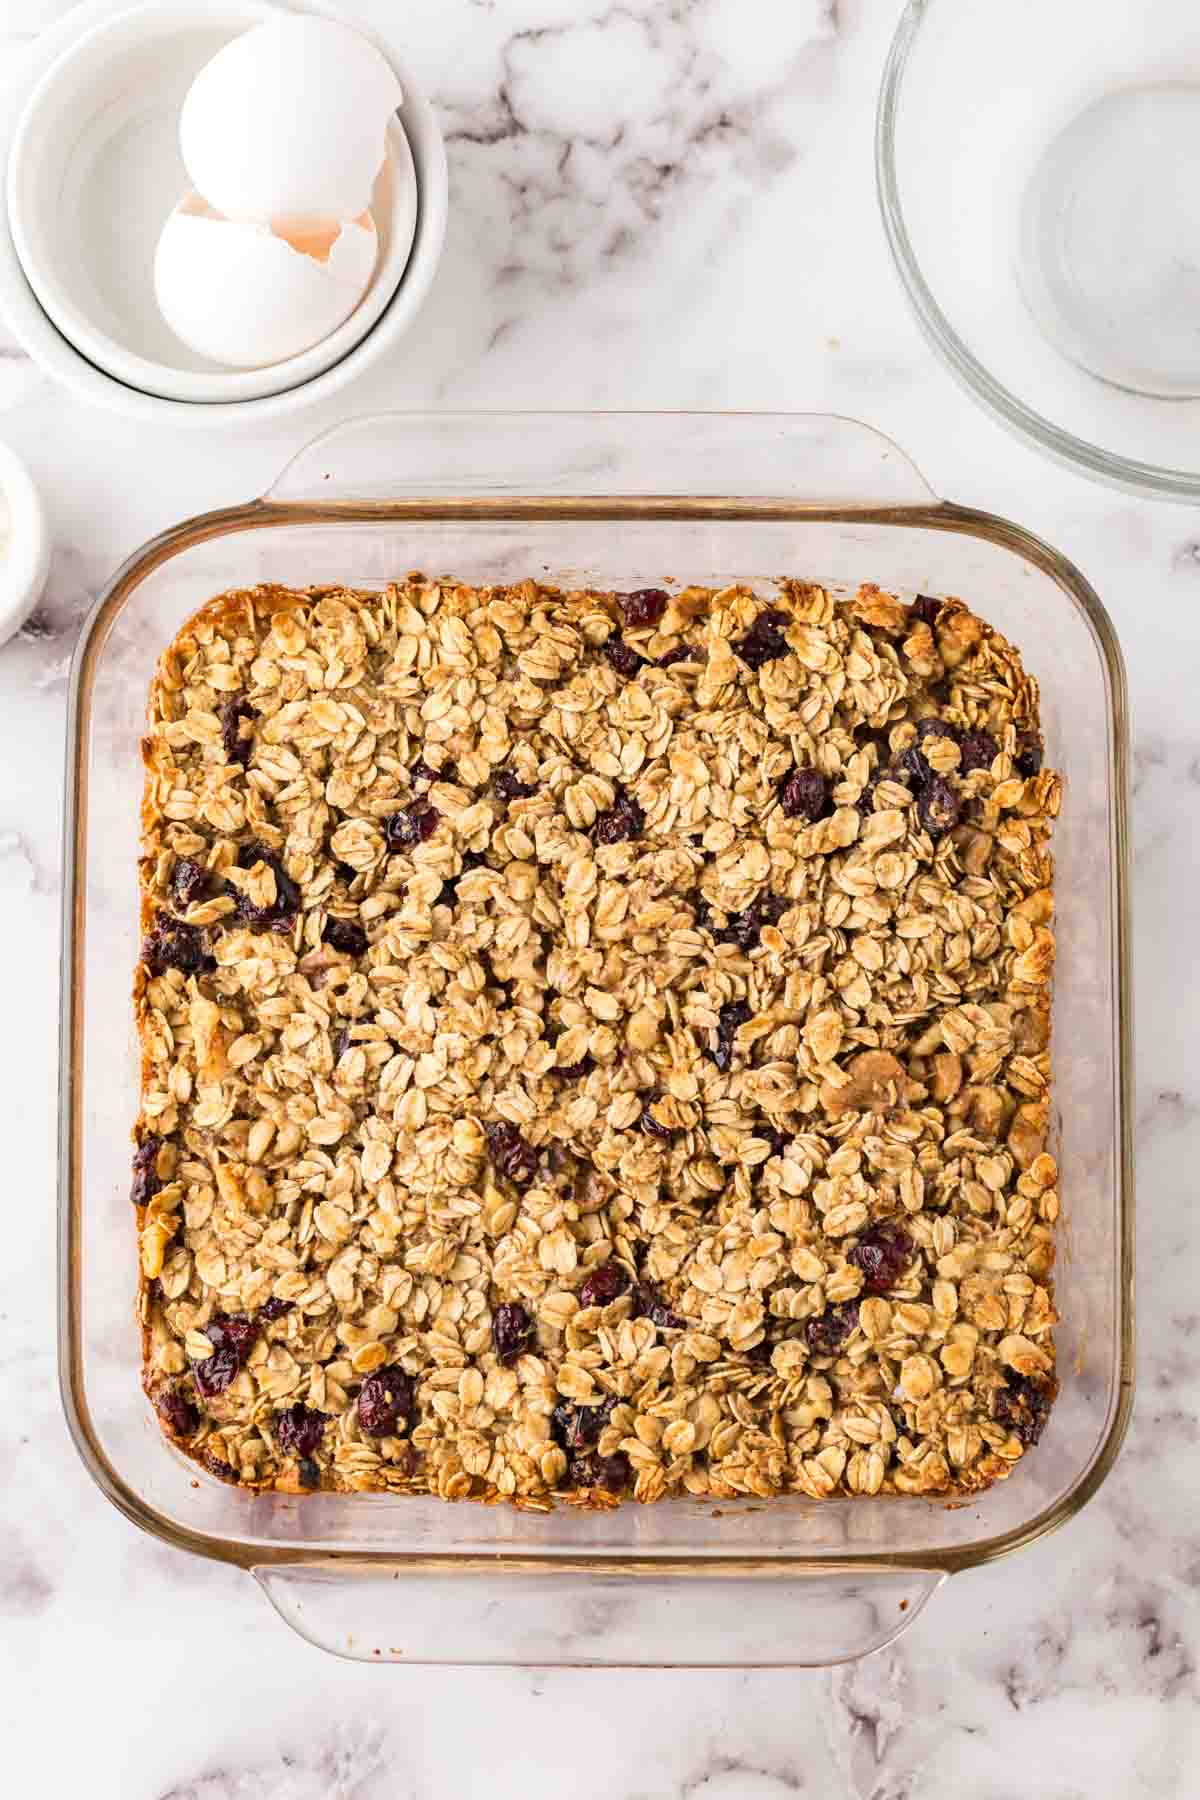 breakfast bars baked into a square clear glass dish.